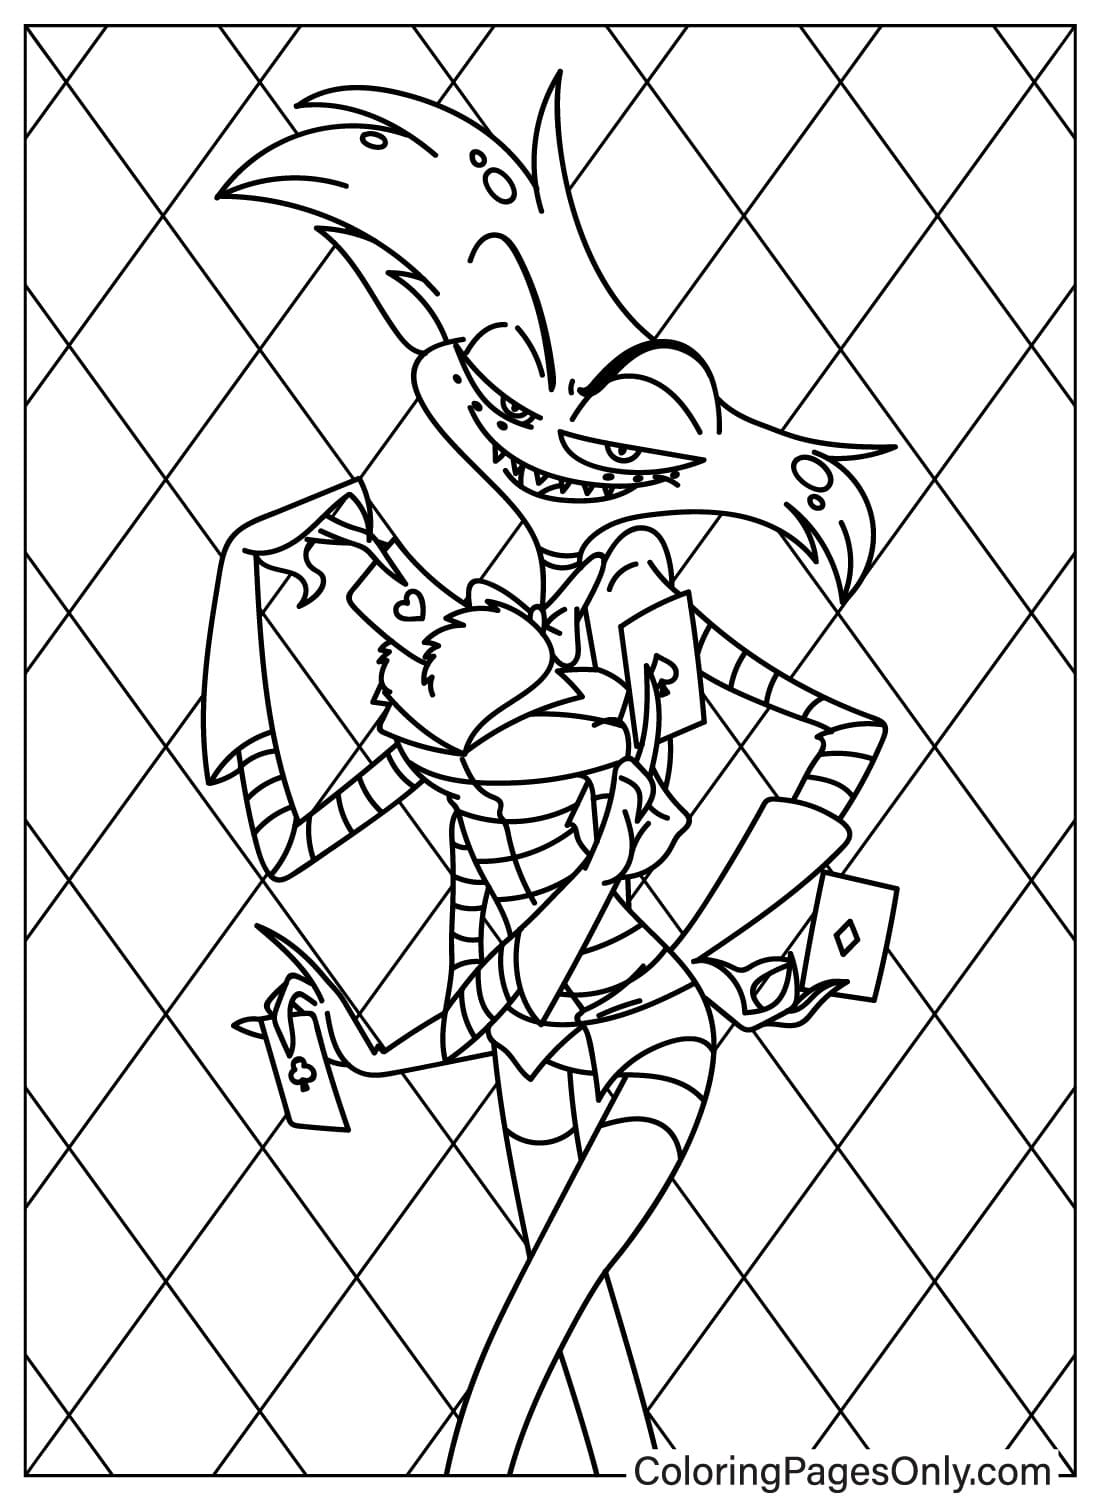 Anthony Coloring Page from Angel Dust